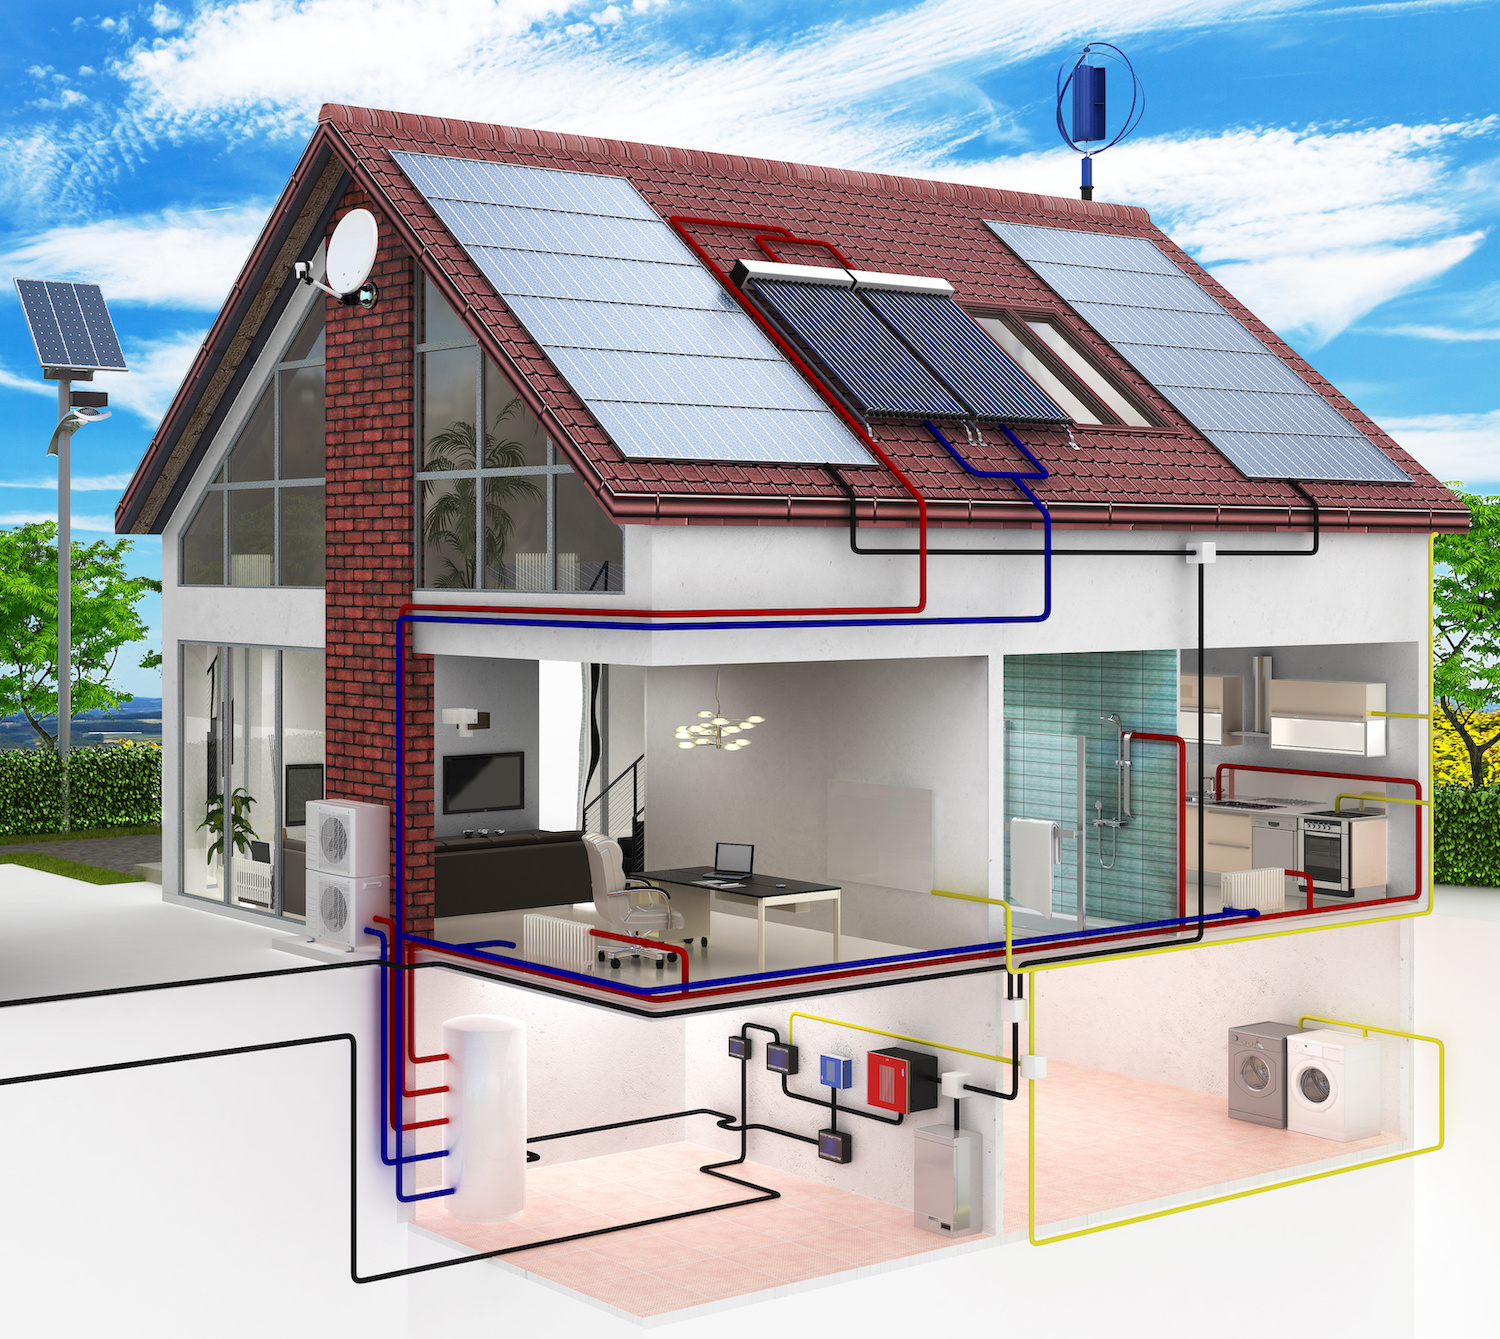 Illustration showing a home with solar panels and it's wiring